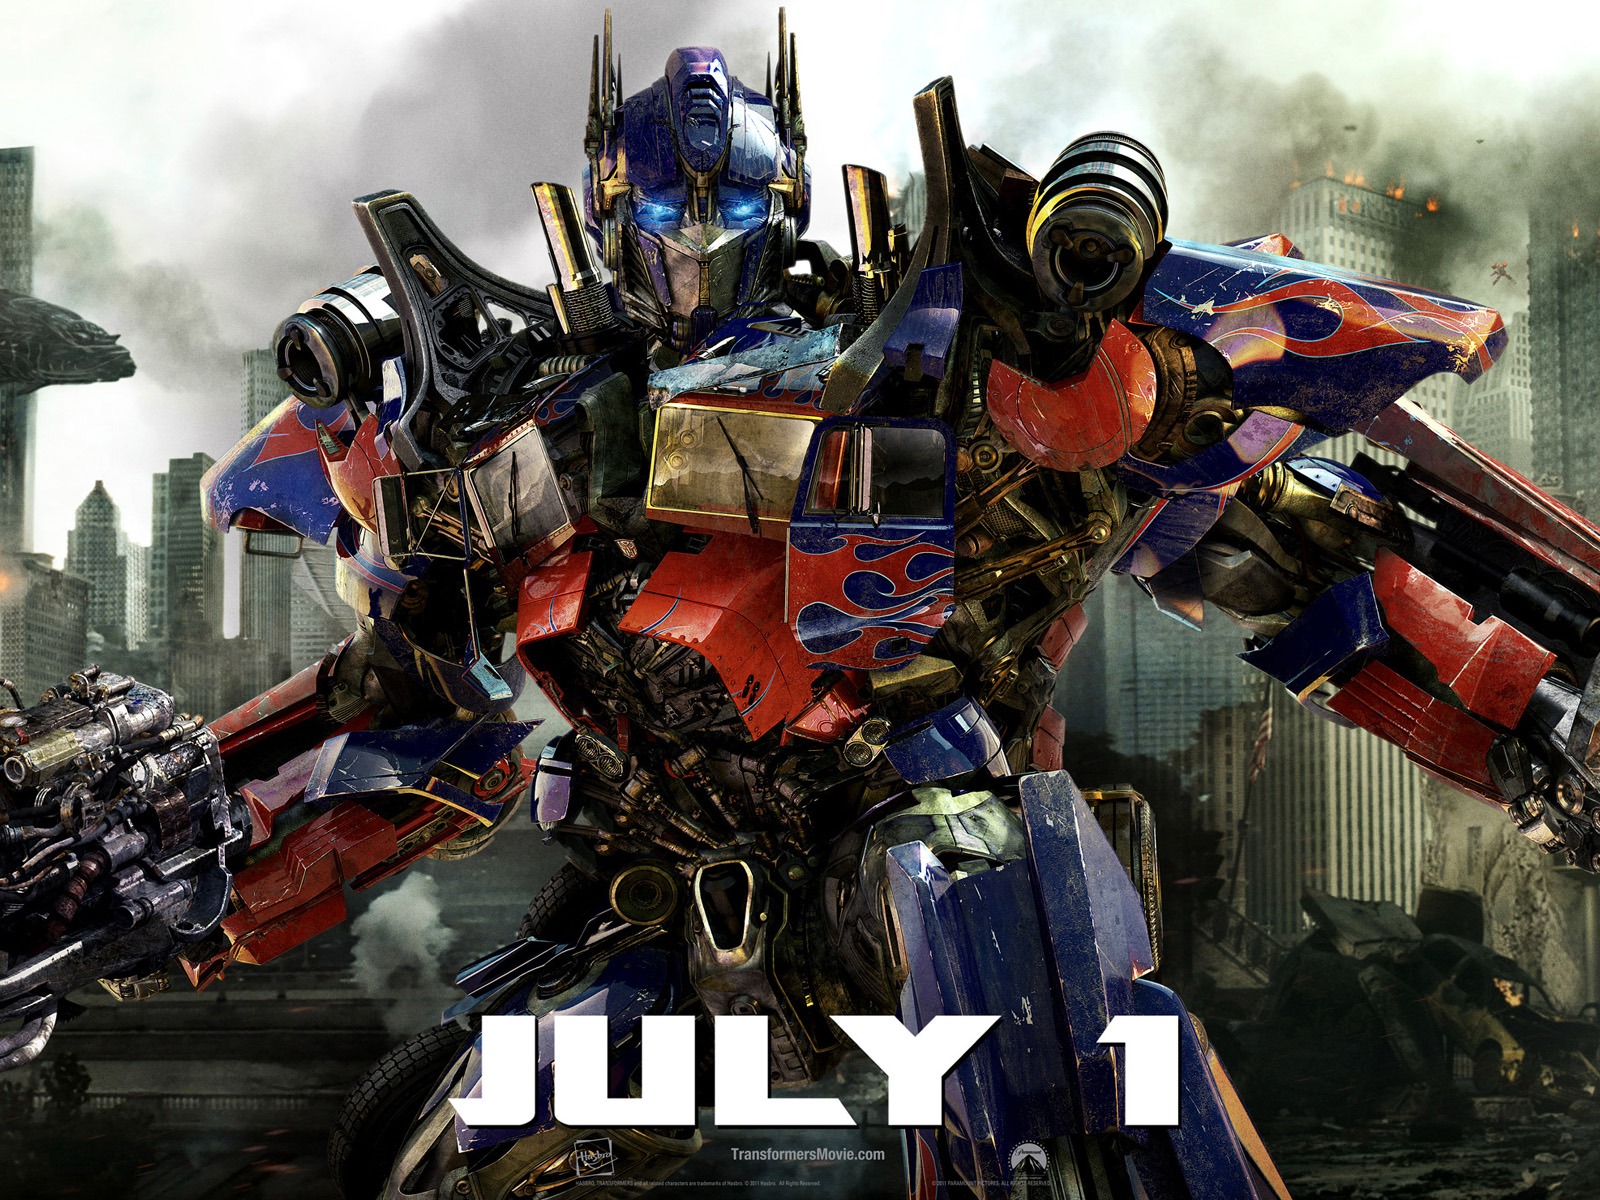 Transformers: The Dark Of The Moon HD wallpapers #1 - 1600x1200